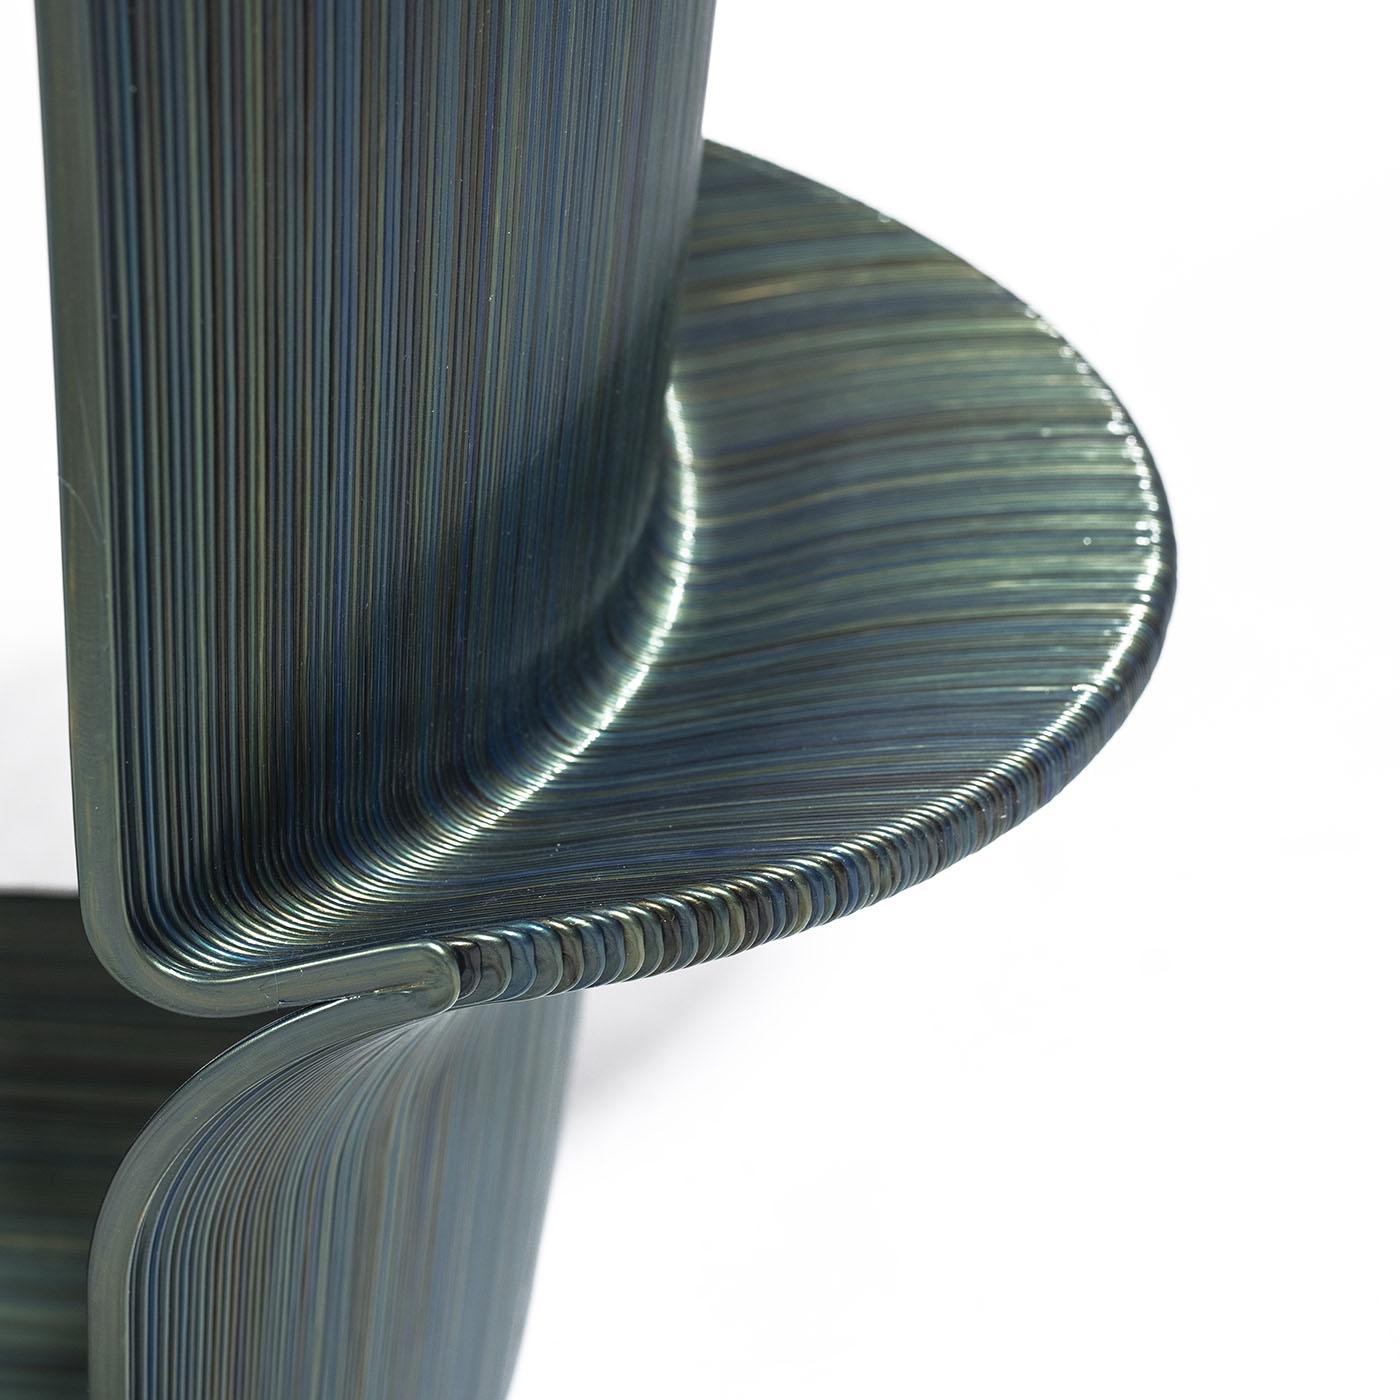 Palermo is a biodegradable PLA high stool with a strong aesthetic inspired by Sicilian landscapes. Designed and 3D printed, it marries innovation and craftsmanship. Its sinuous, organic shapes bring vitality and elegance to indoor and outdoor